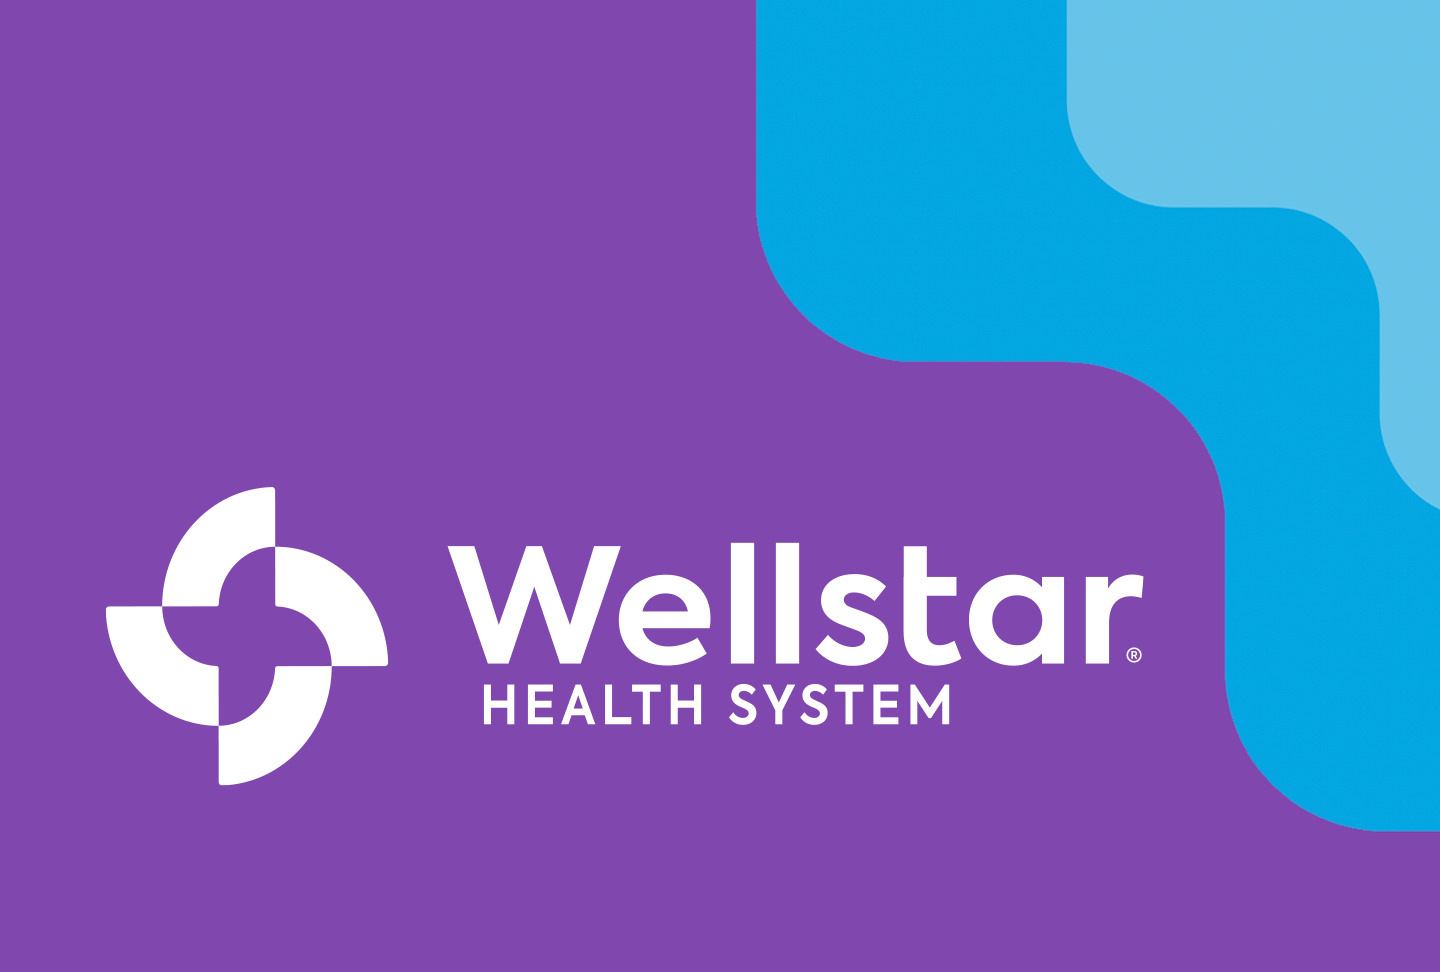 Wellstar Is Now Official Health System Partner of Kennesaw State Athletics Image